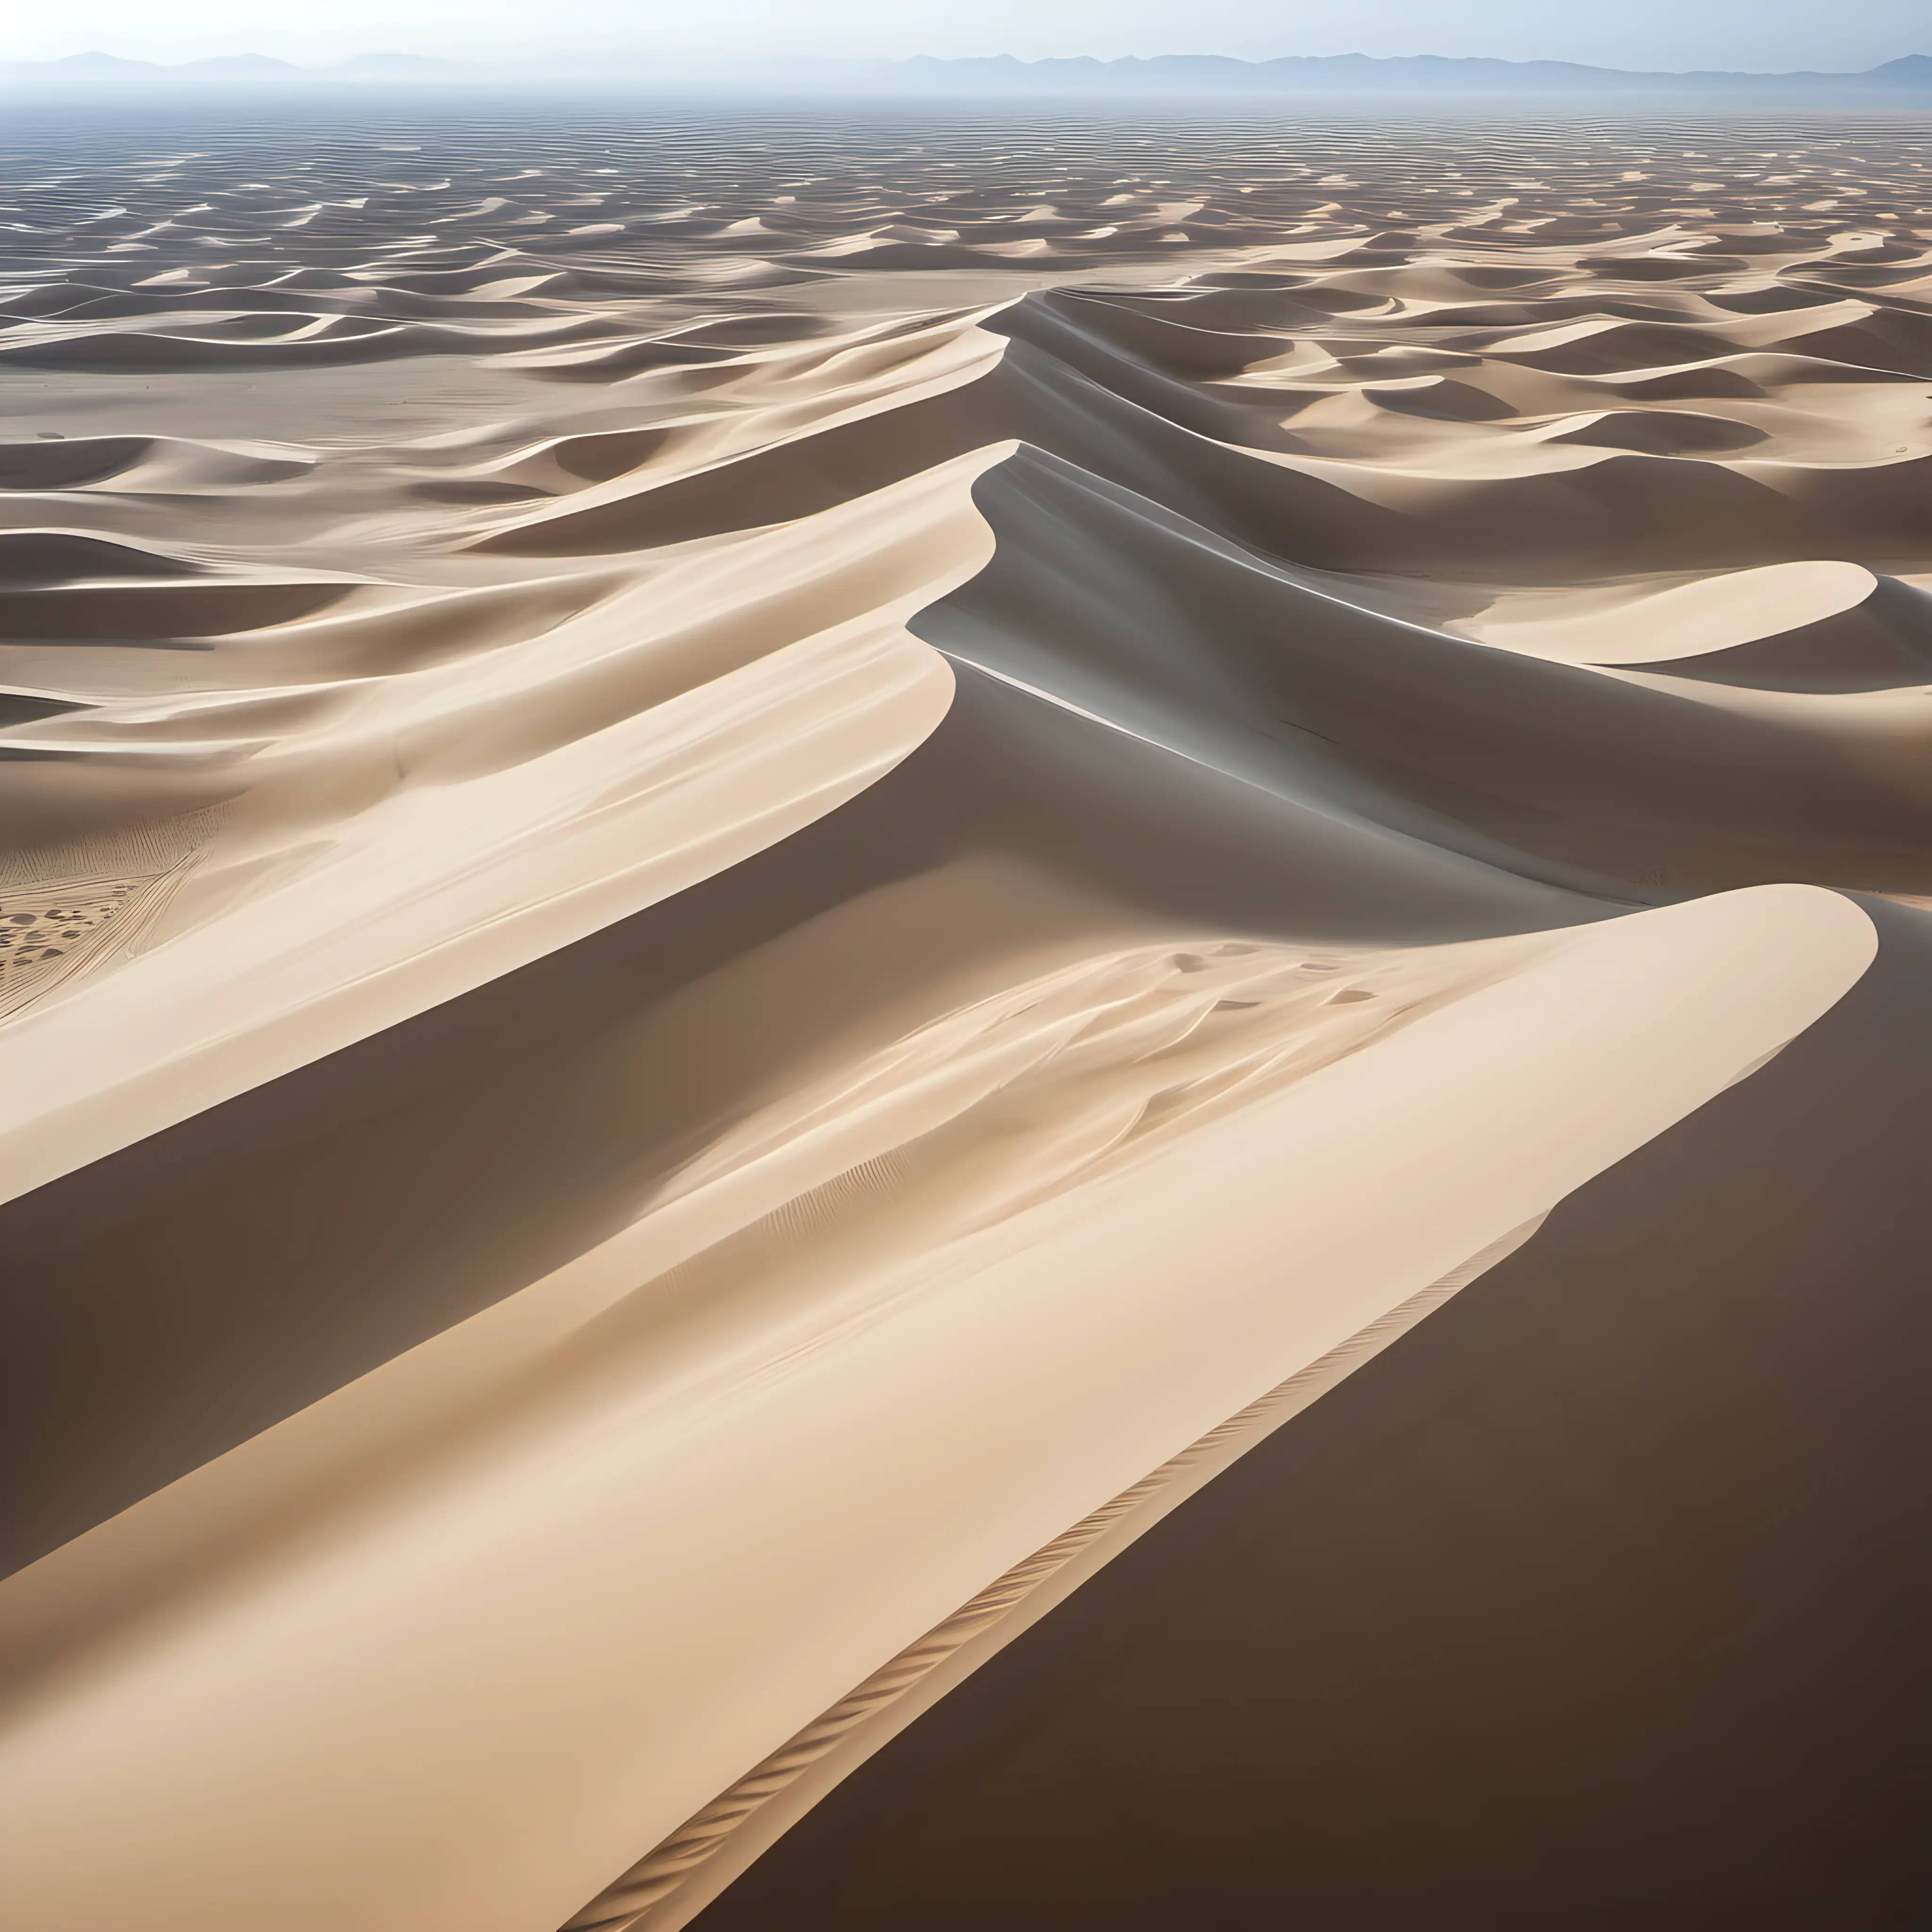 An aerial photograph capturing the vast expanse of desert sand dunes, creating a minimalist and serene landscape, shot with Sony Alpha a9 II and Sony FE 200-600mm f/5.6-6.3 G OSS lens, natural light, hyper realistic photograph, ultra detailed